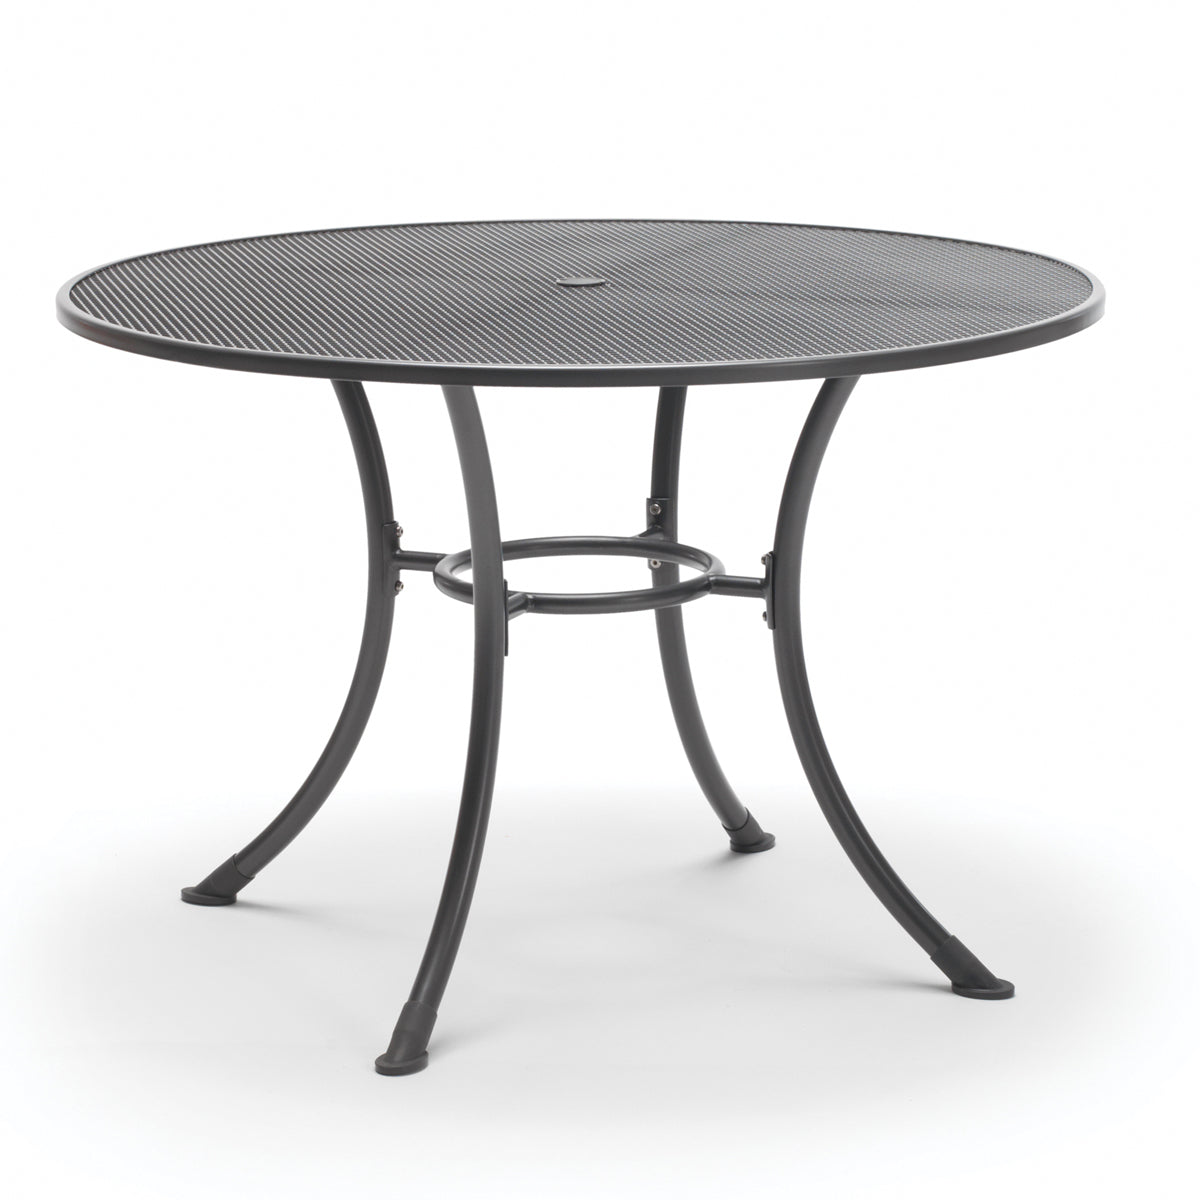 Round 60" inch wrought iron table with floor levelers and umbrella hole